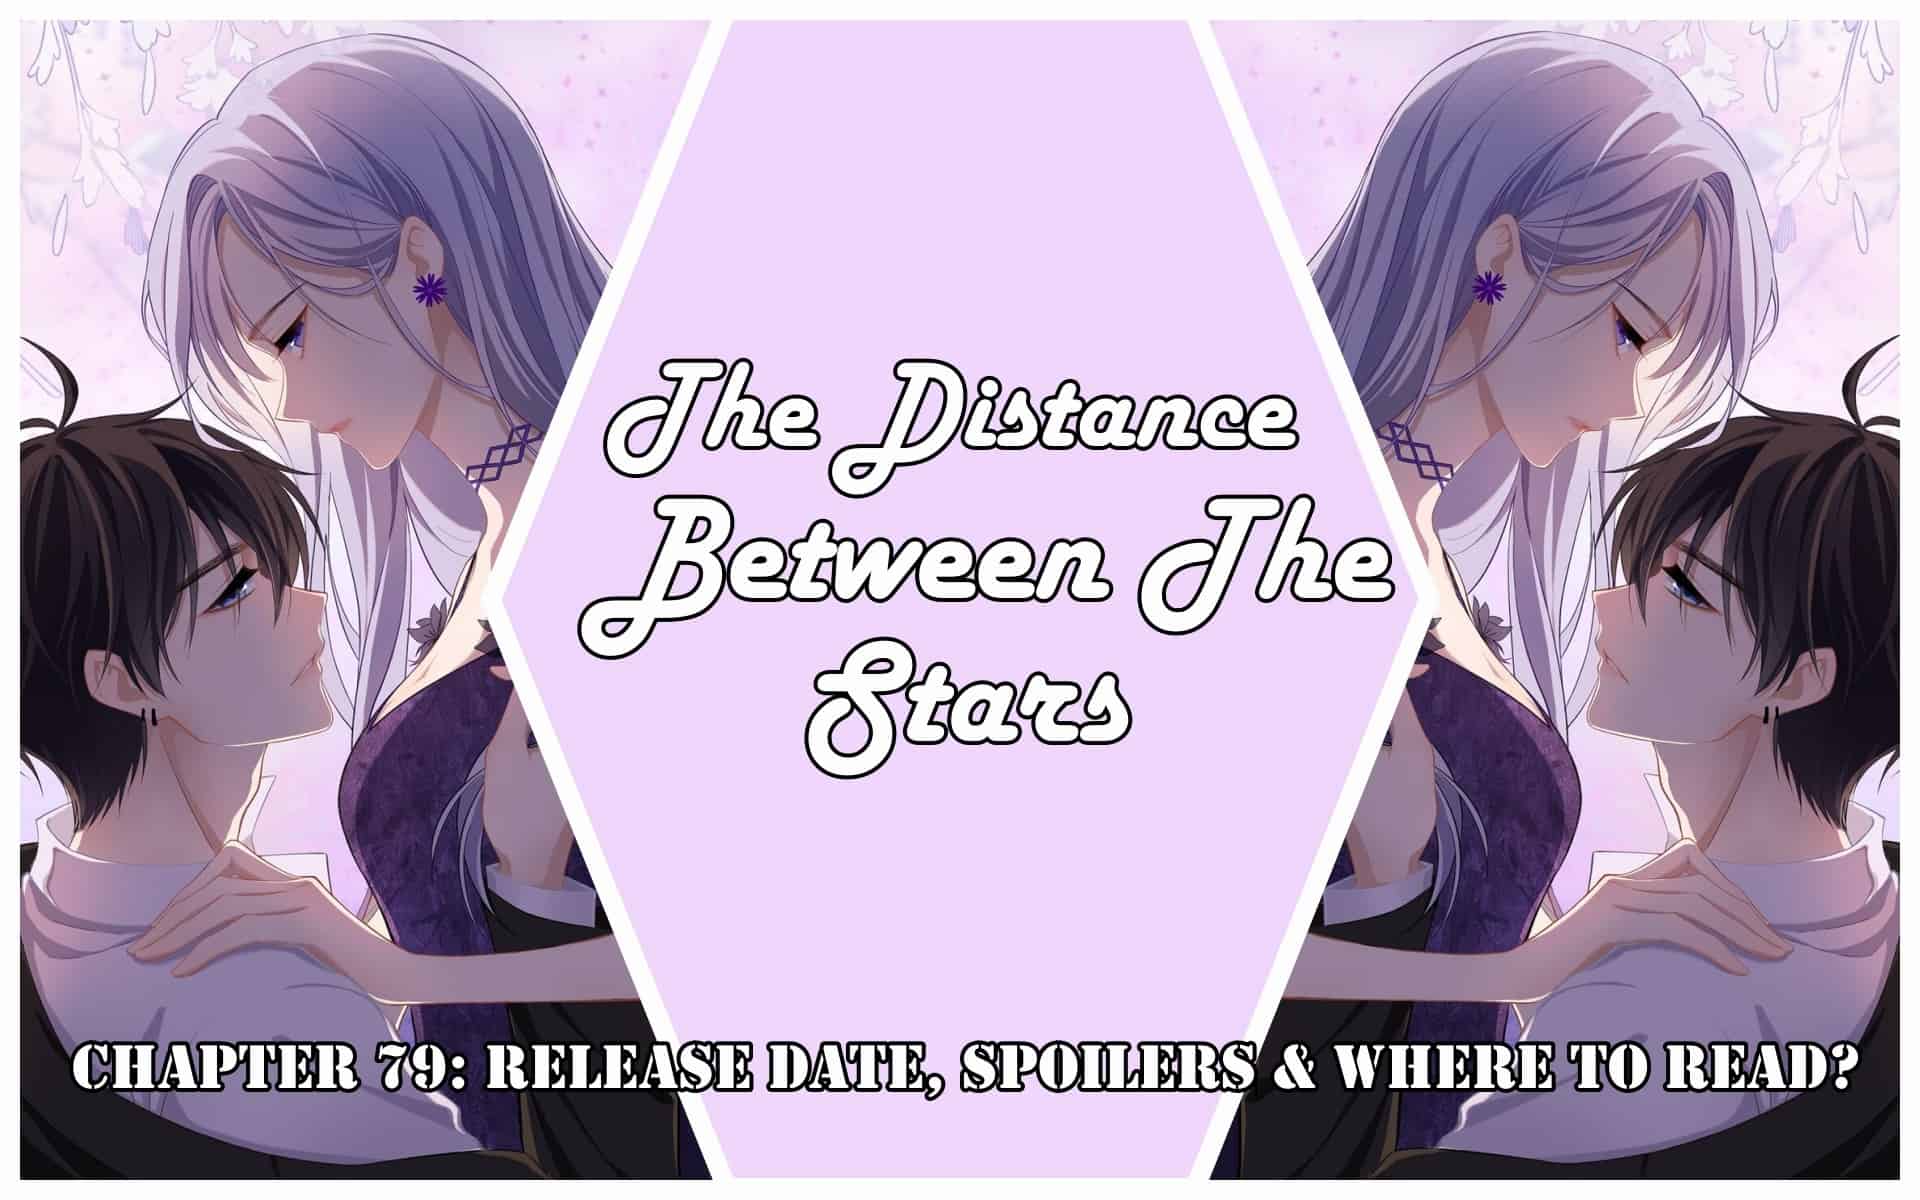 The Distance Between The Stars Chapter 79: Release Date, Spoilers & Where to Read?